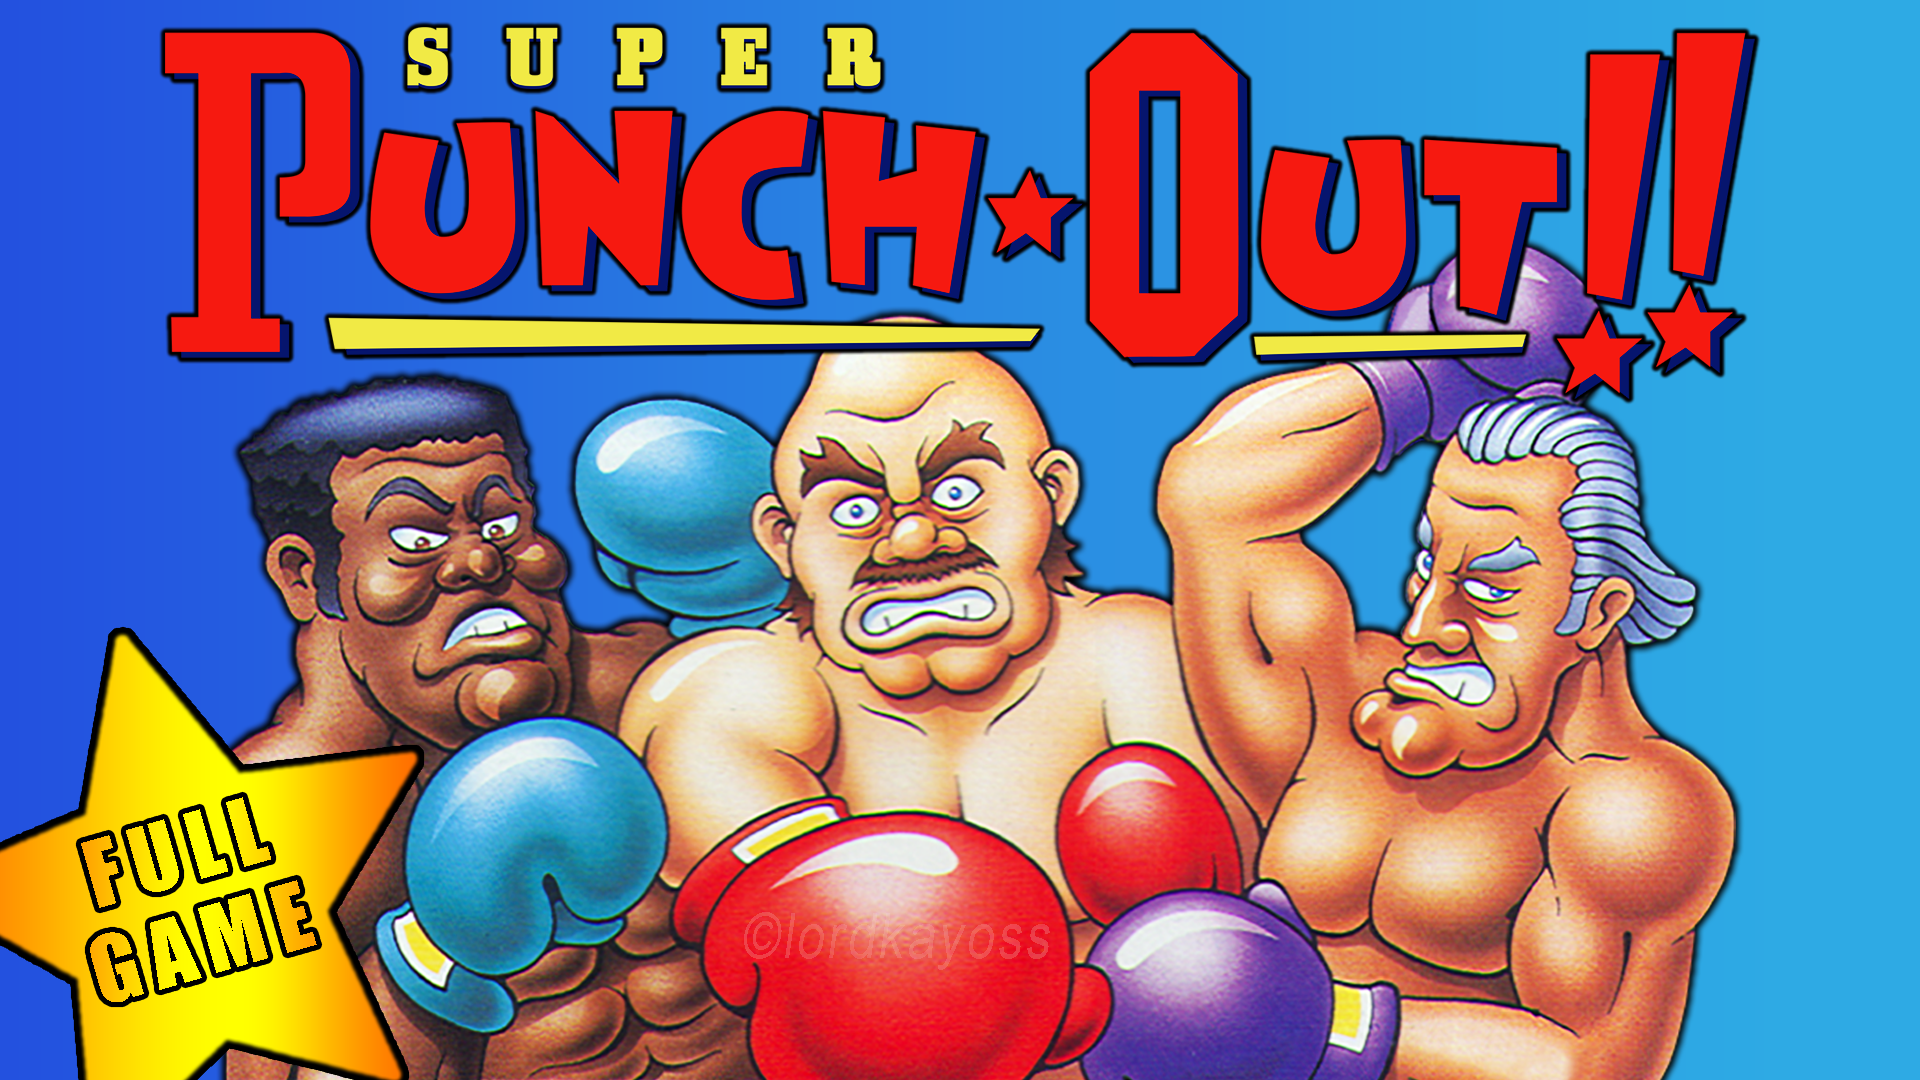 super-punch-out-snes-playthrough-with-commentary-walkthrough-4k-lord-kayoss-lordkayoss